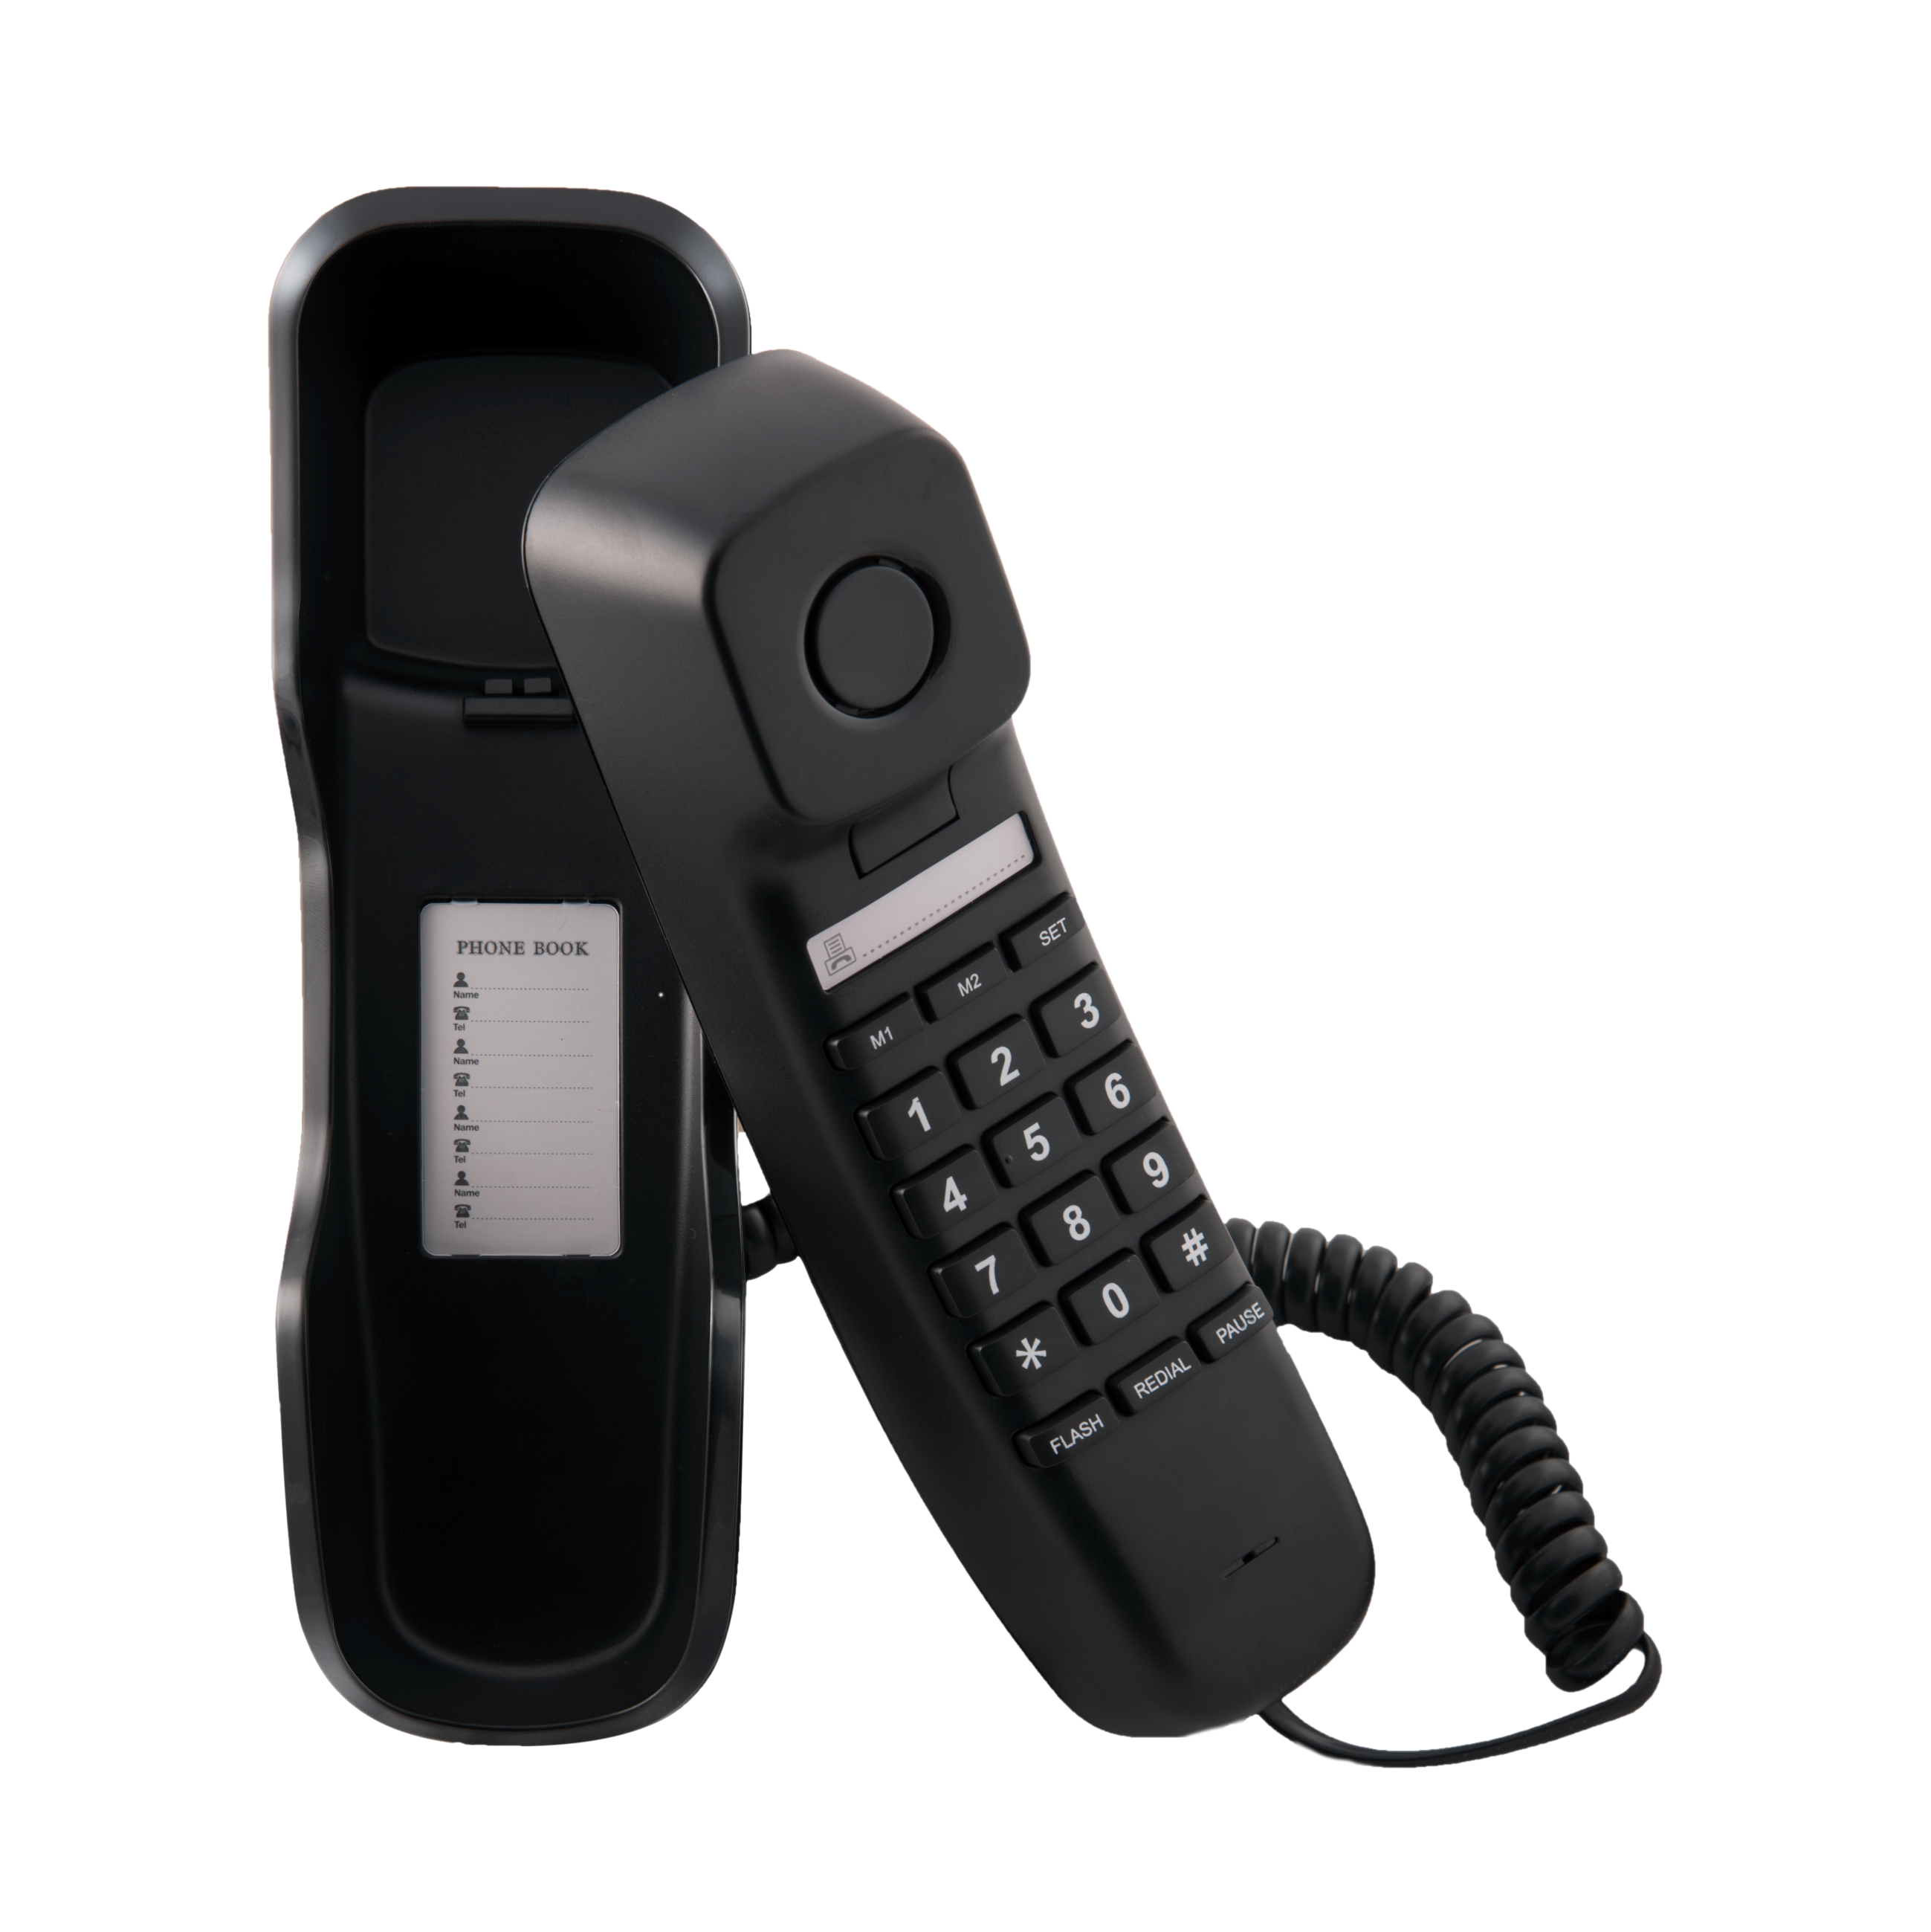 Fortechno | FOR A Brighter Life, BLACK FIXED WIRELESS PHONE Manufacturers